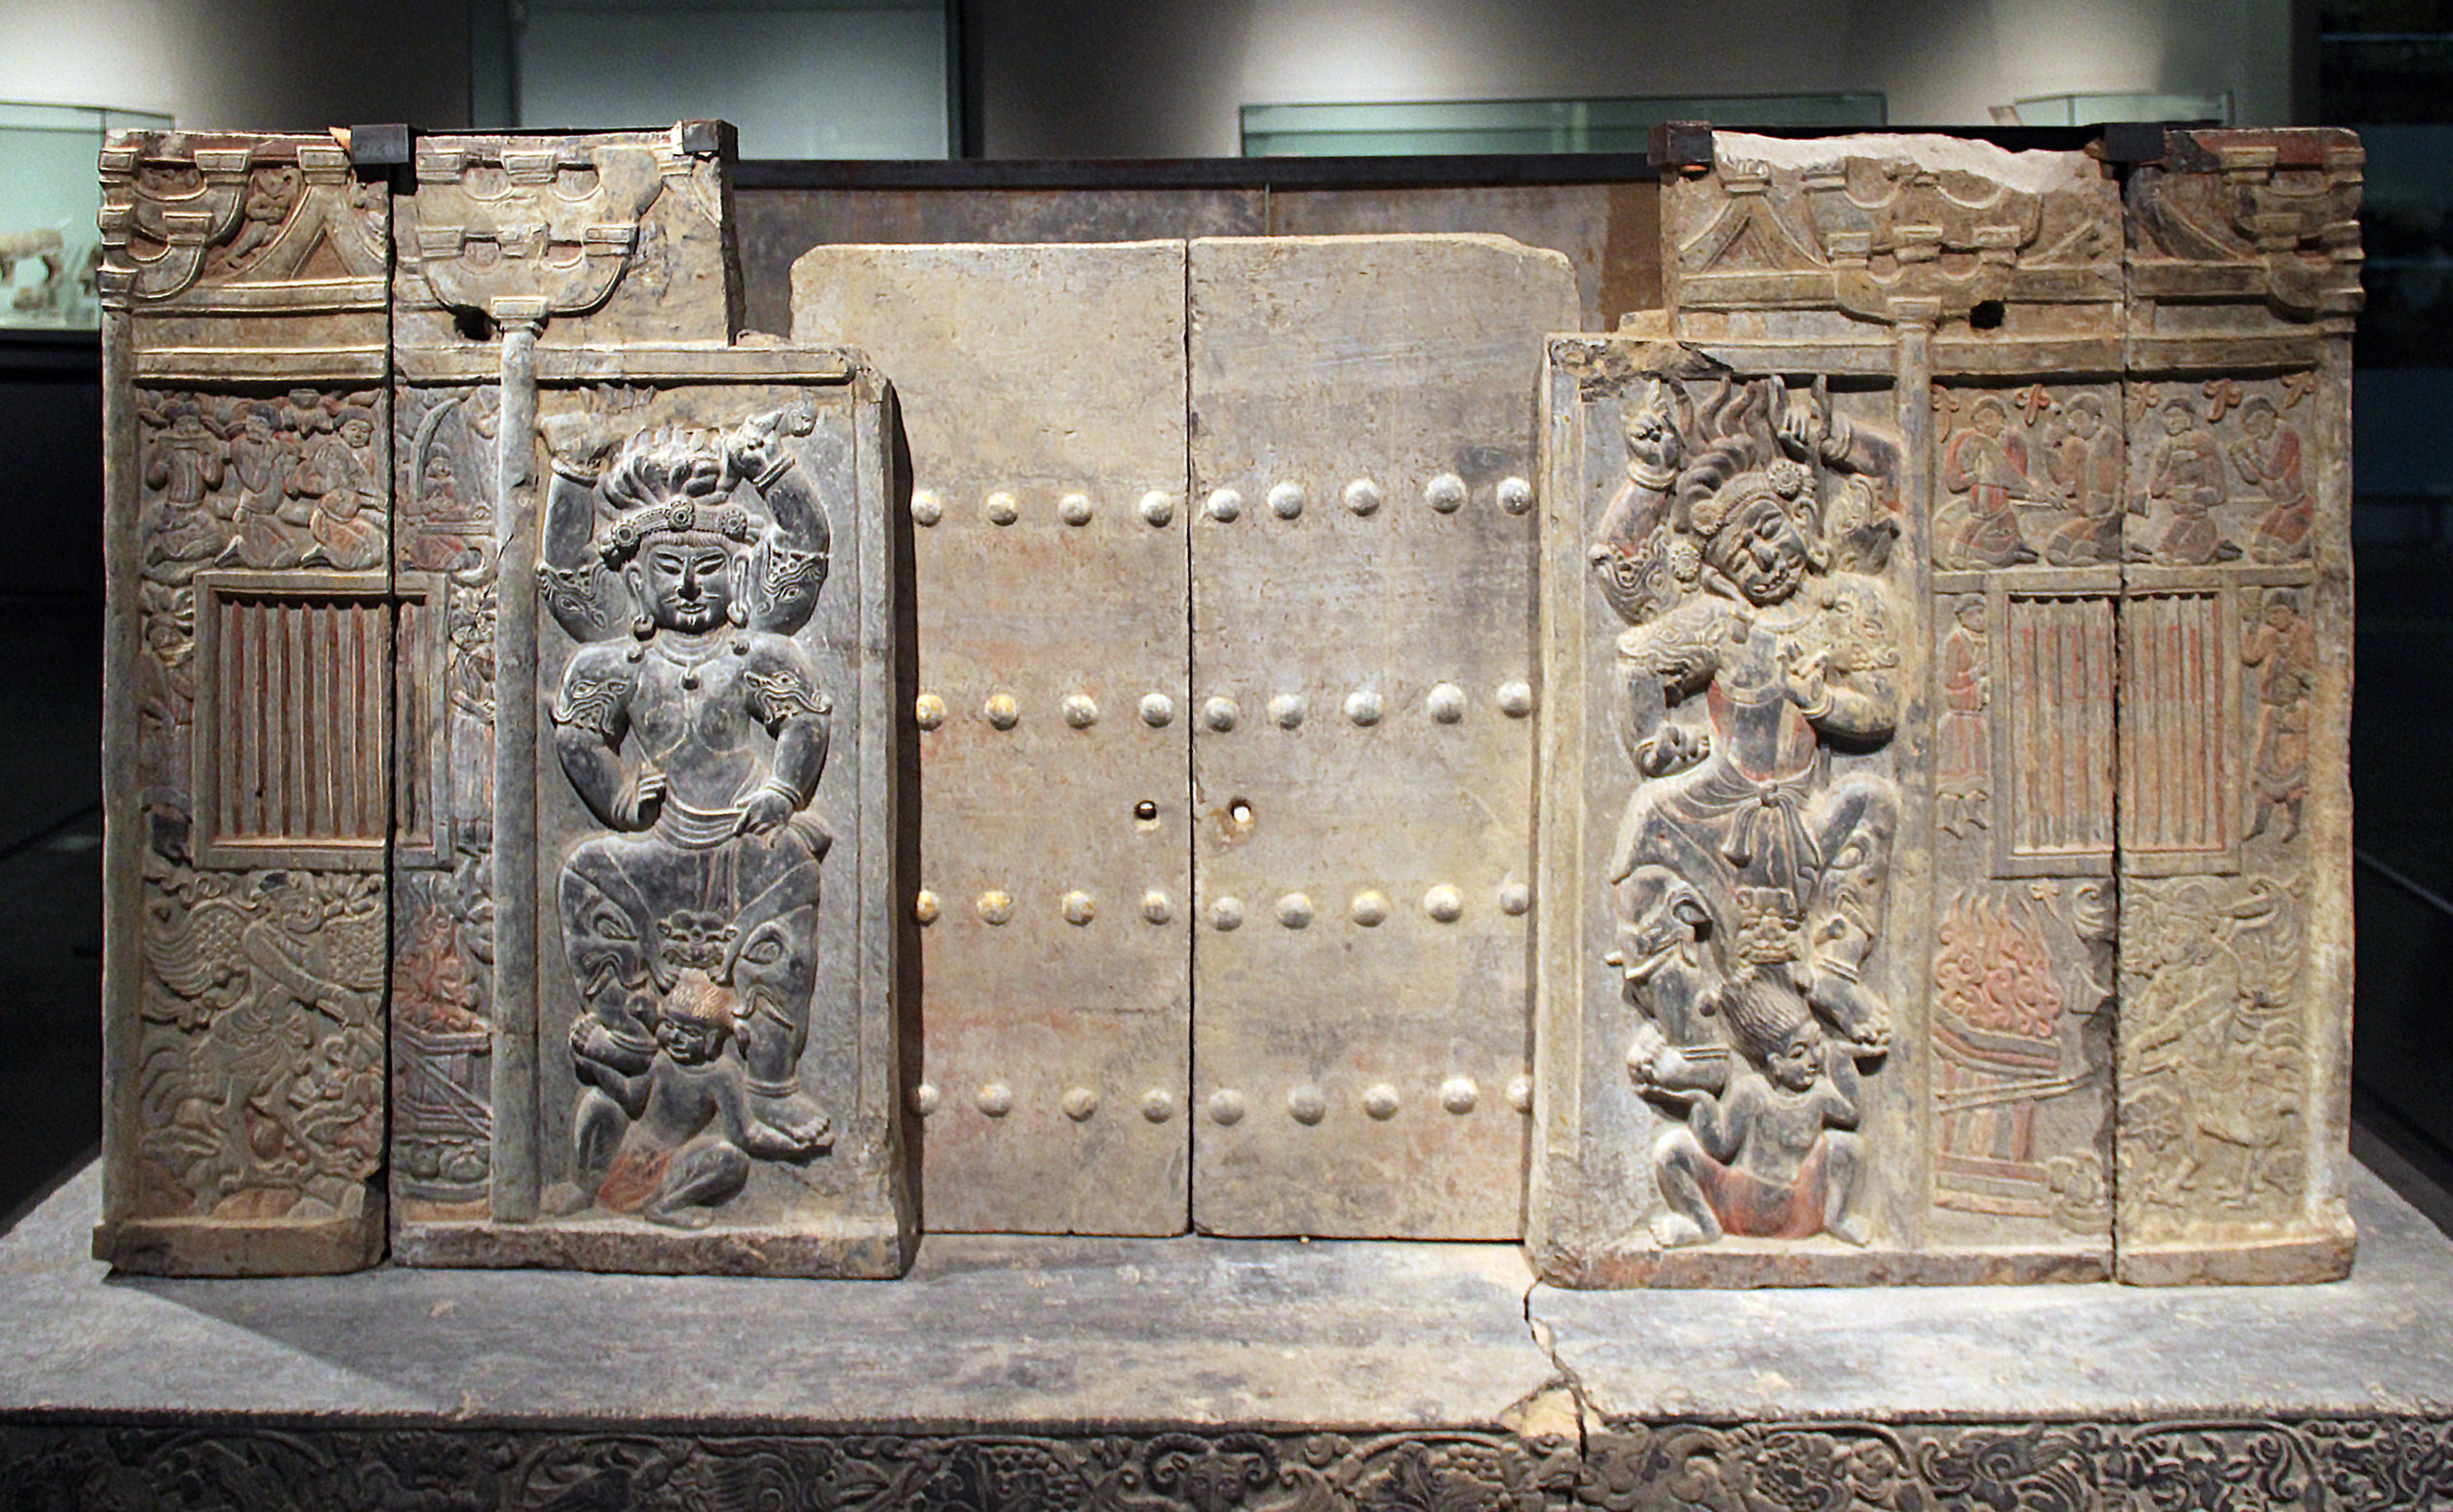 Wirkak or Shi Jun sarcophagus, 579–80 (Northern Zhou dynasry), stone carvings with traces of pigment and gilding, China, Shaanxi Province (Shaanxi History Museum, Xi’an, China)